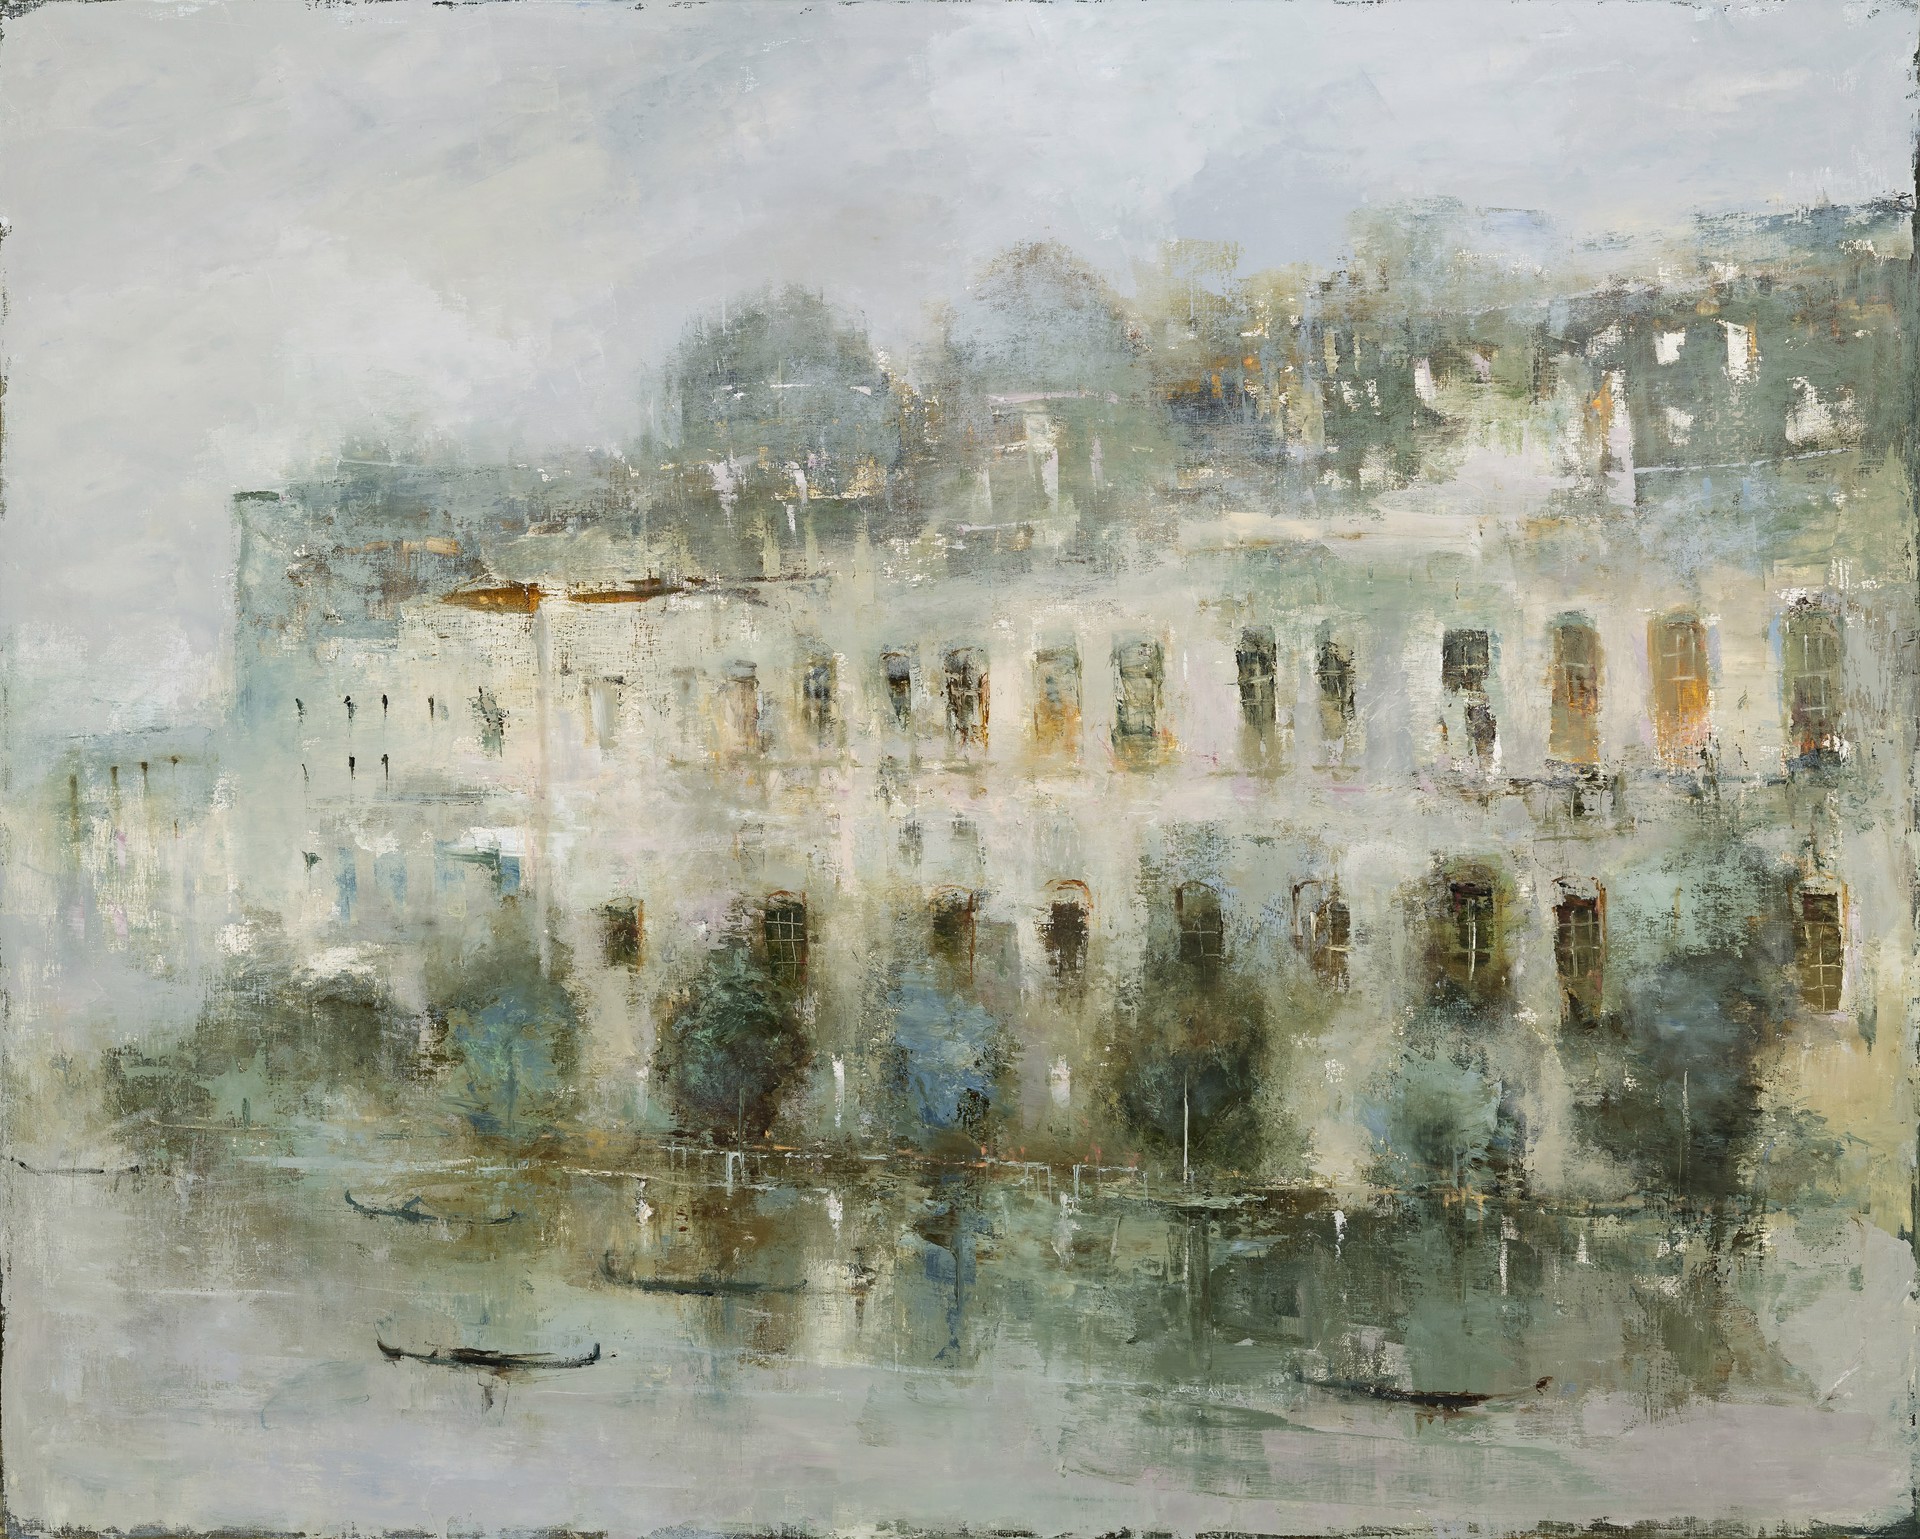 Flutter in the Breeze as They Please by France Jodoin